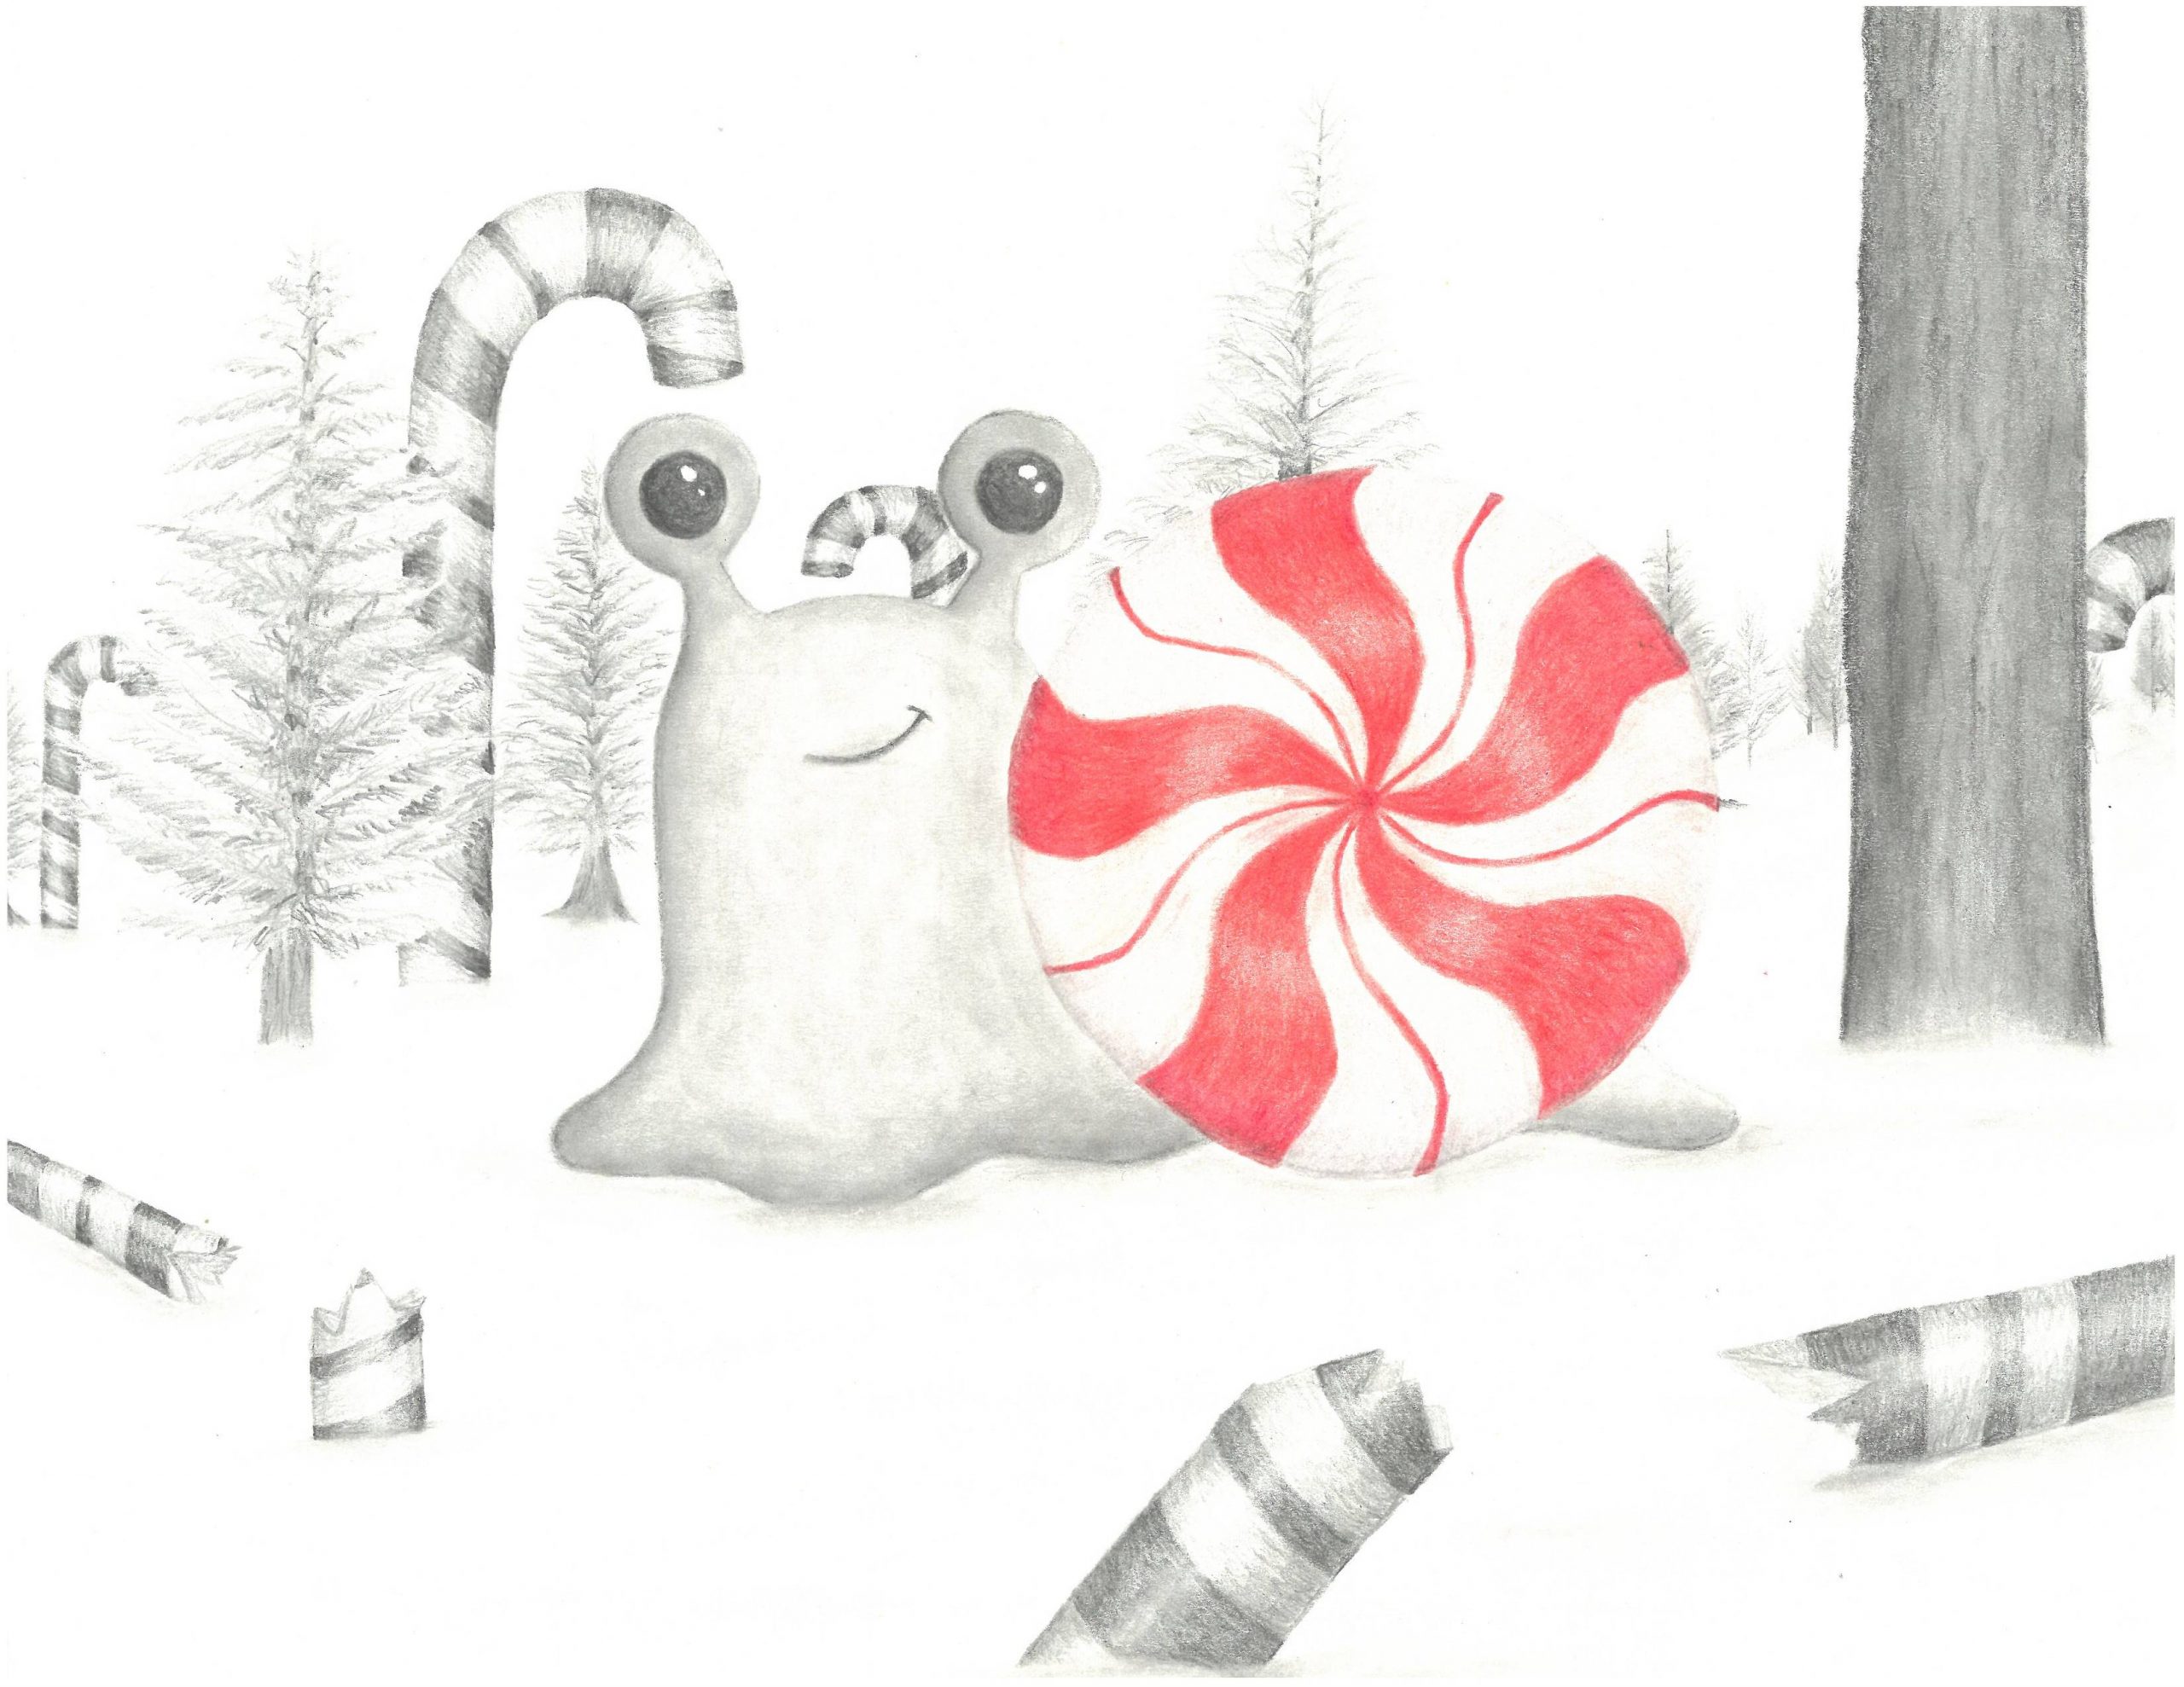 A sketch of a frog and Christmas candies in a forest